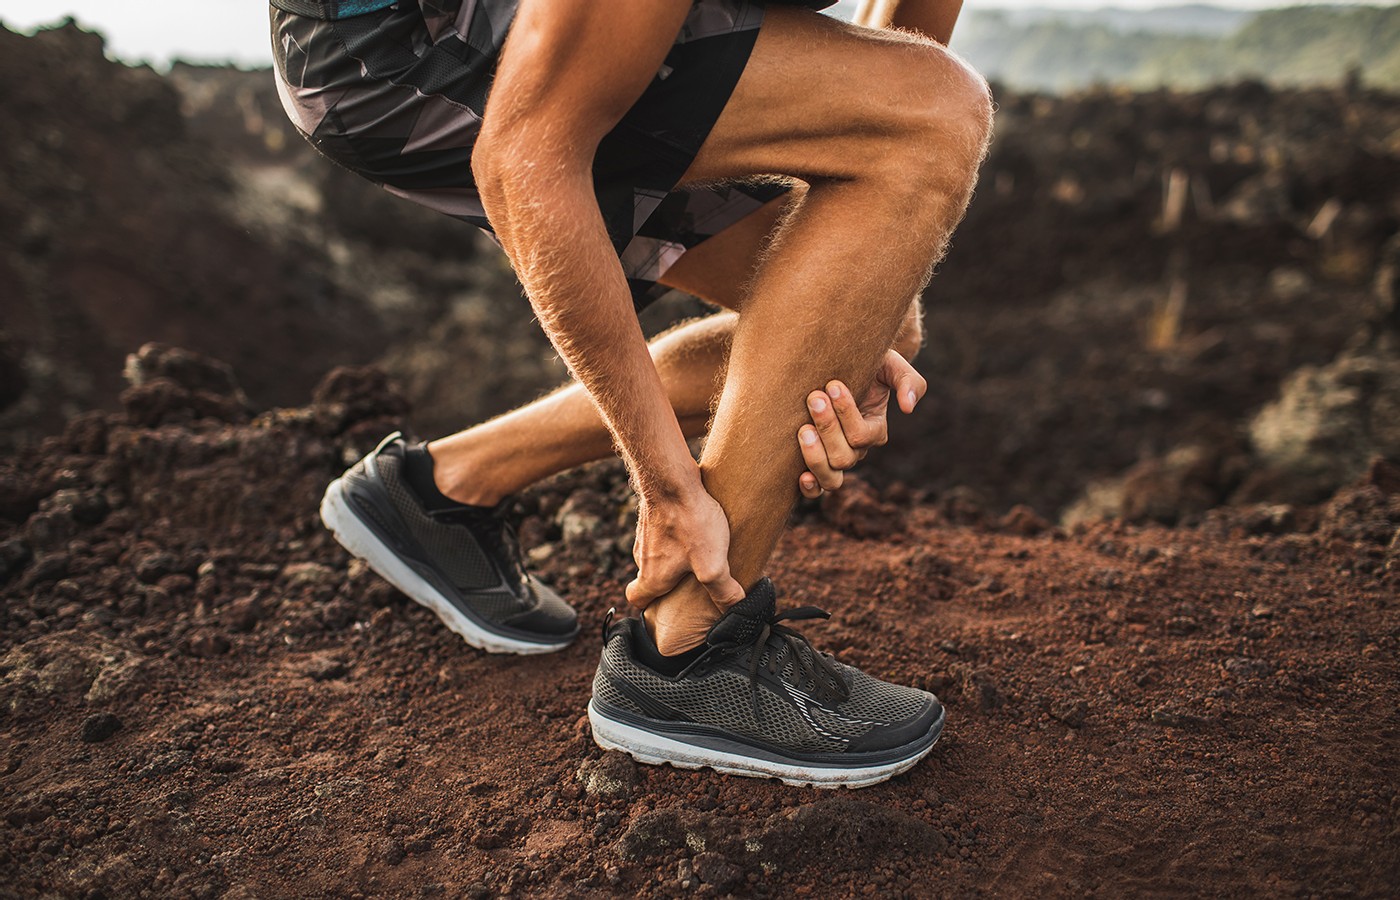 Achilles Tendon Rupture: The Chiropractor's Role